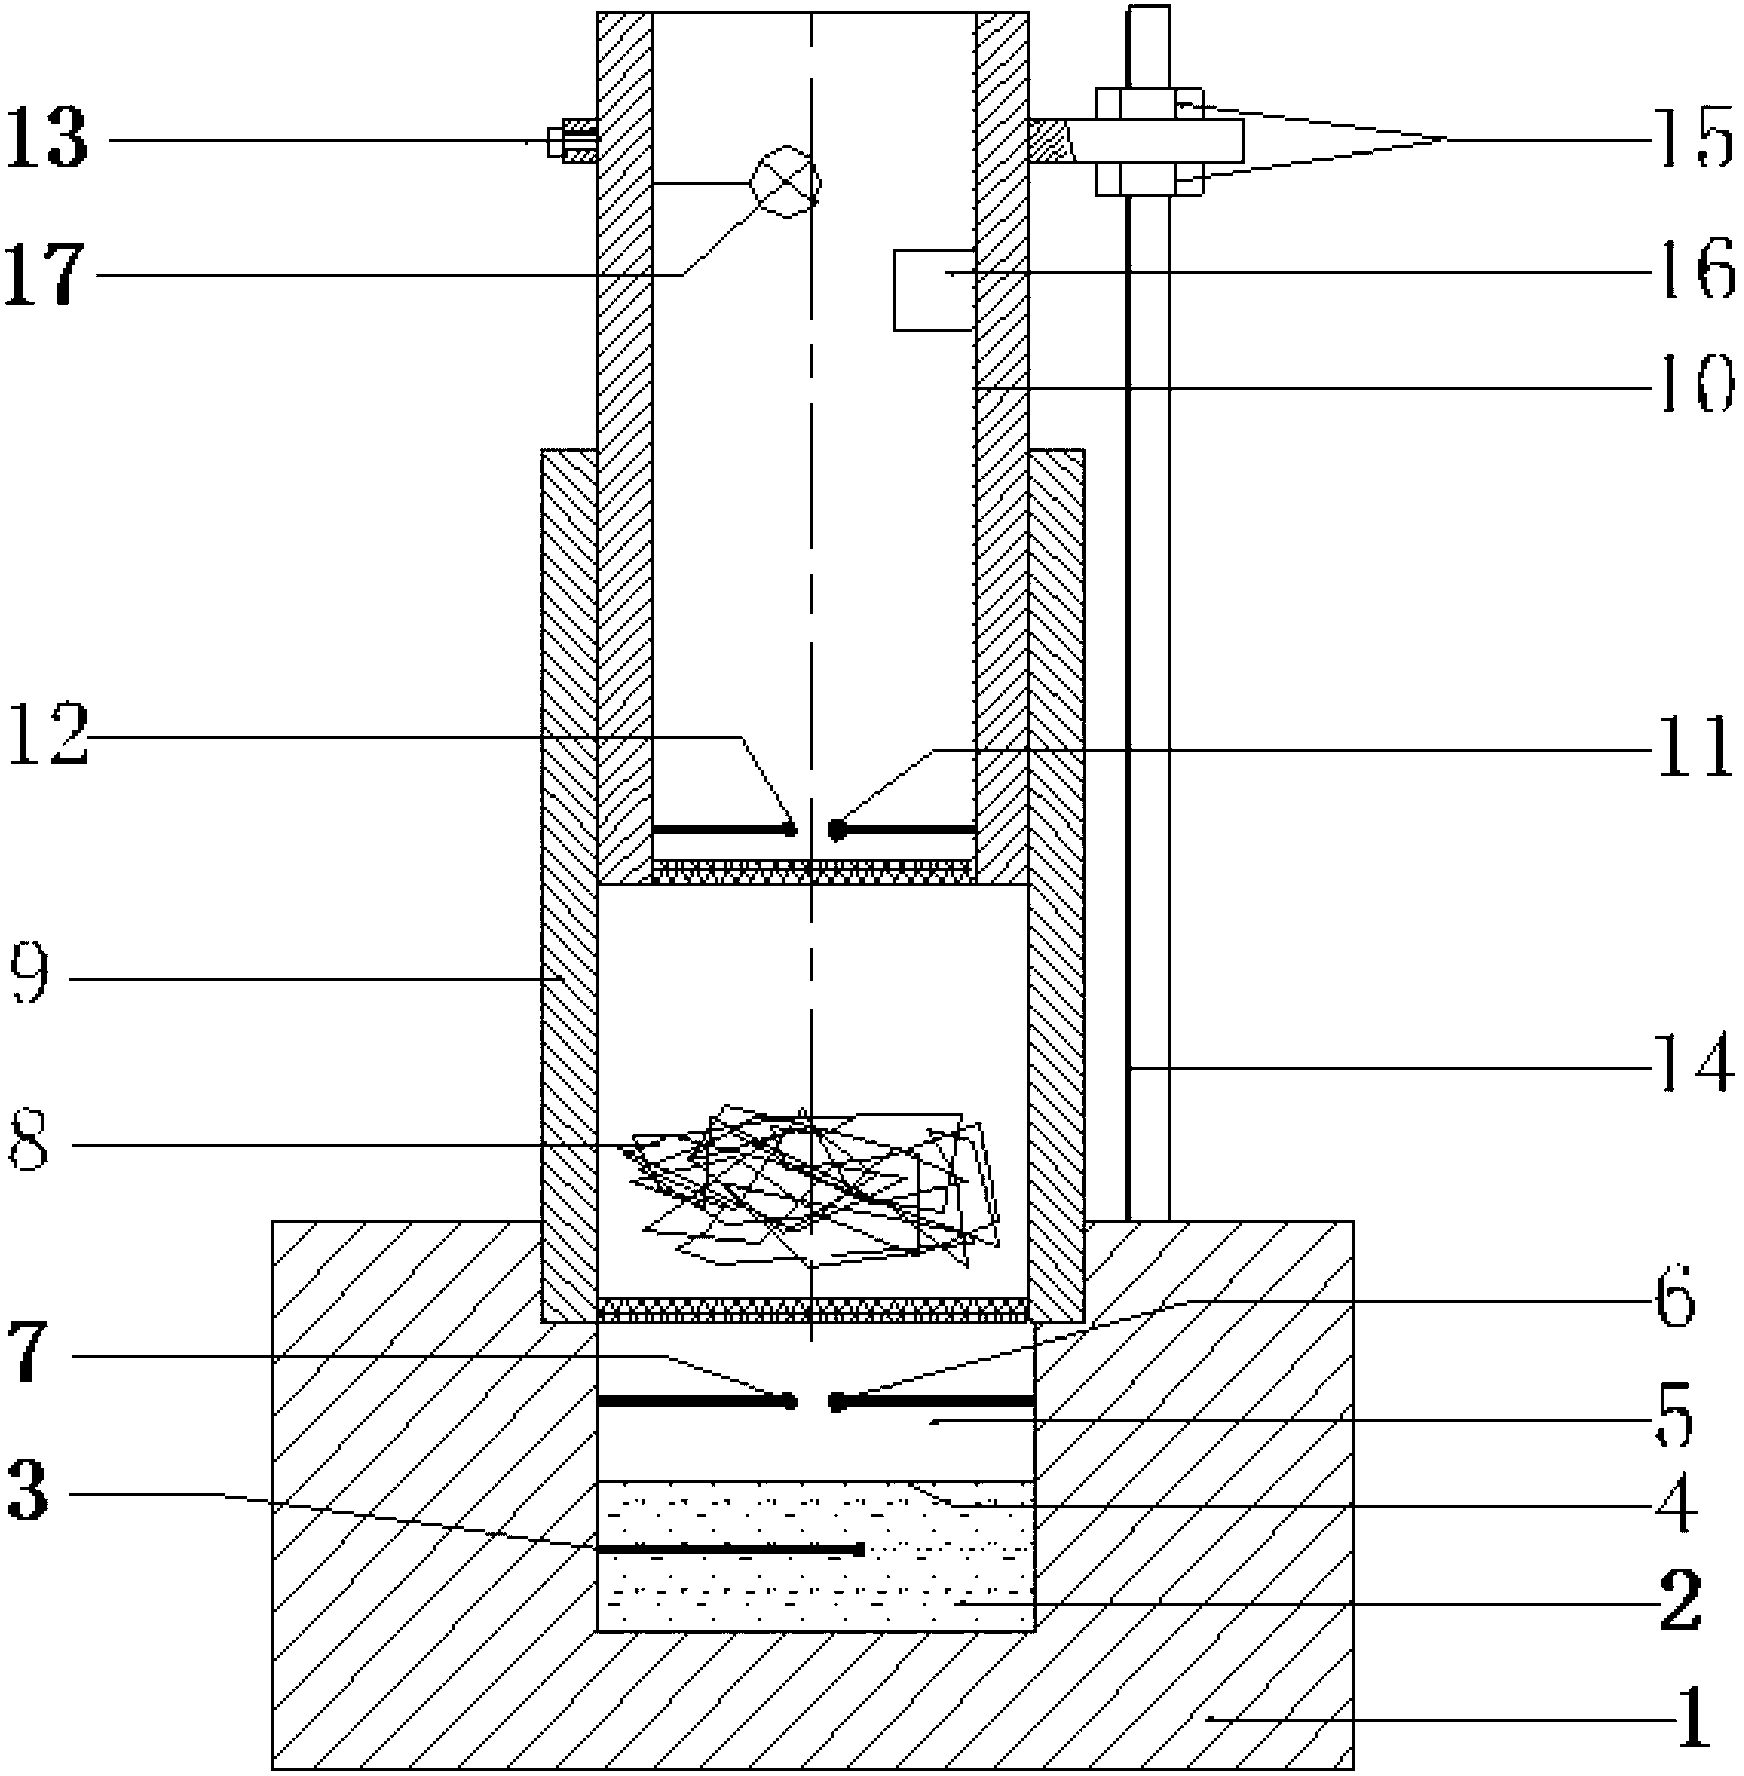 Measuring apparatus for moisture transmission performance of wadding fiber assembly